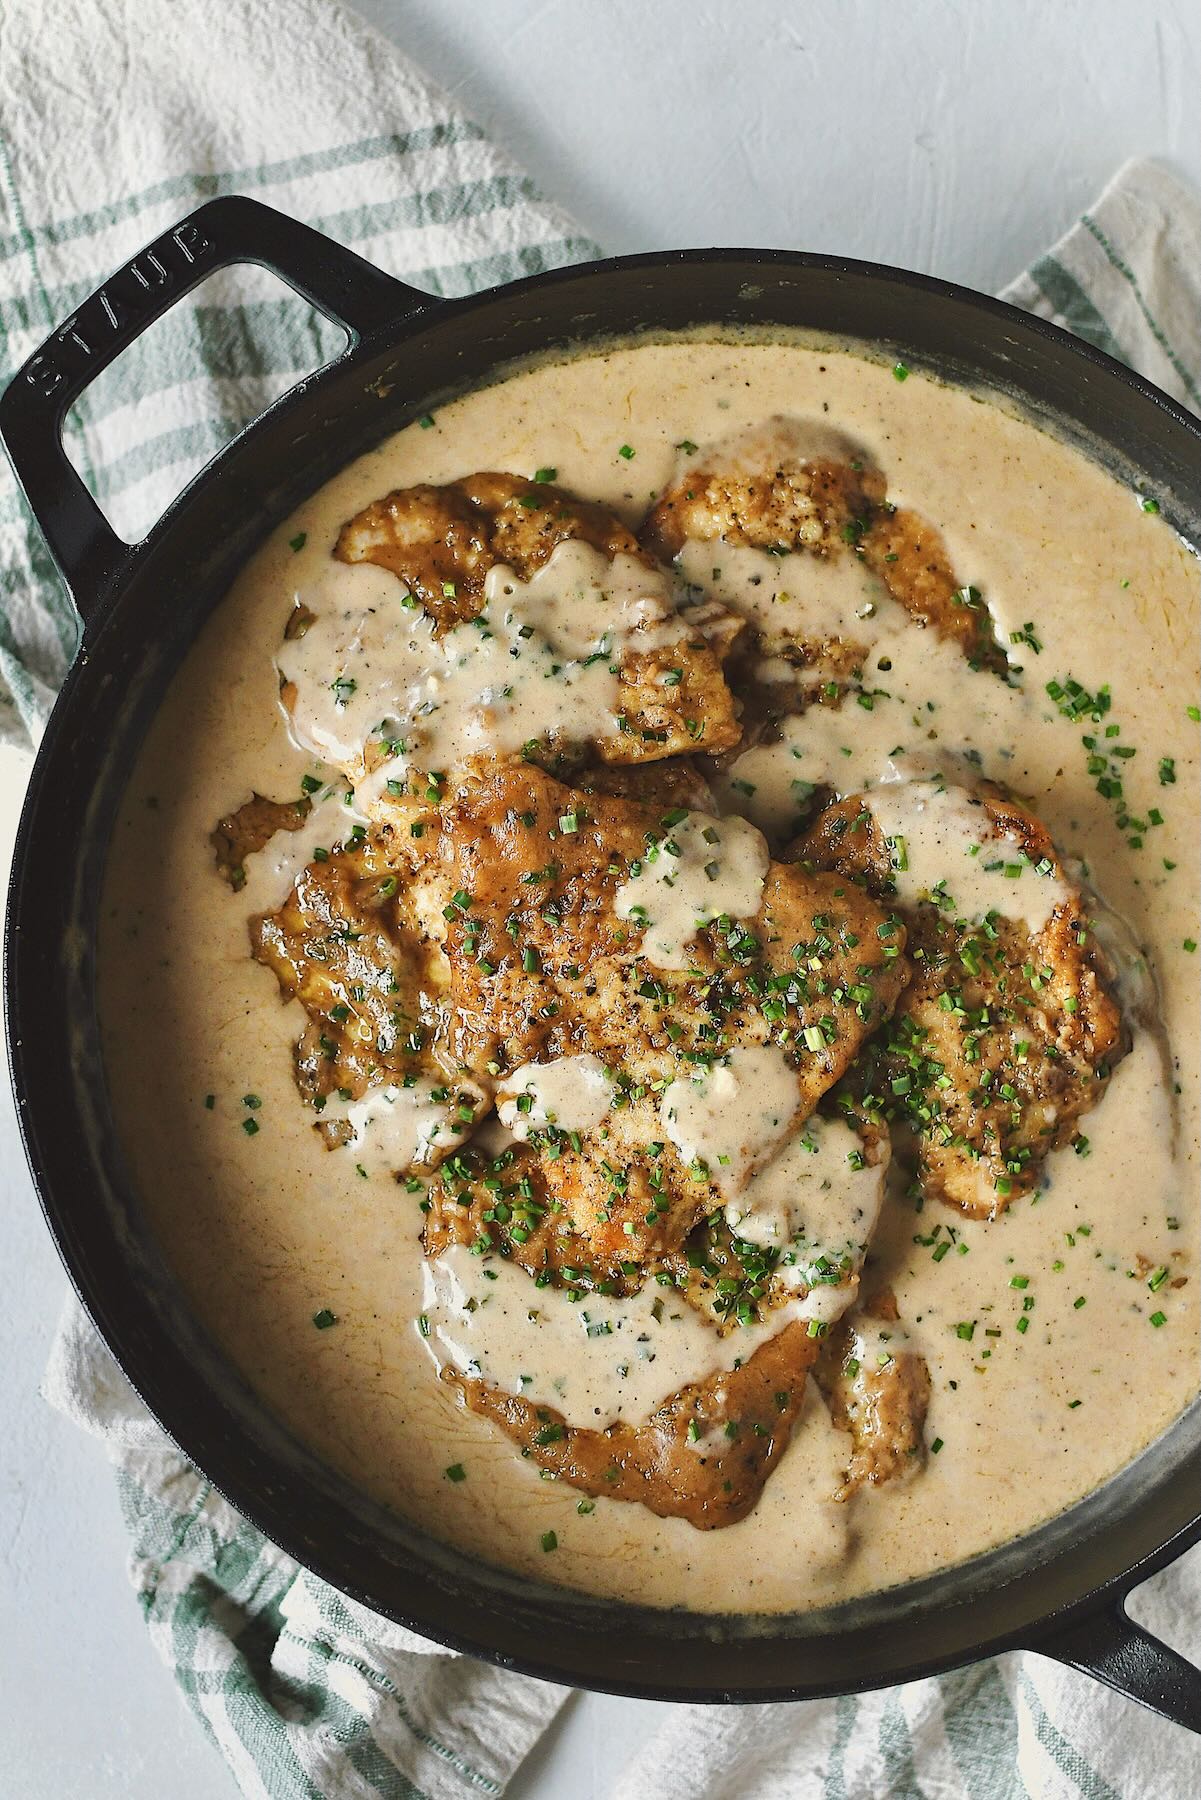 Irish Chicken in Whiskey Cream Sauce fully cooked and resting in the sauce, ready to be served.